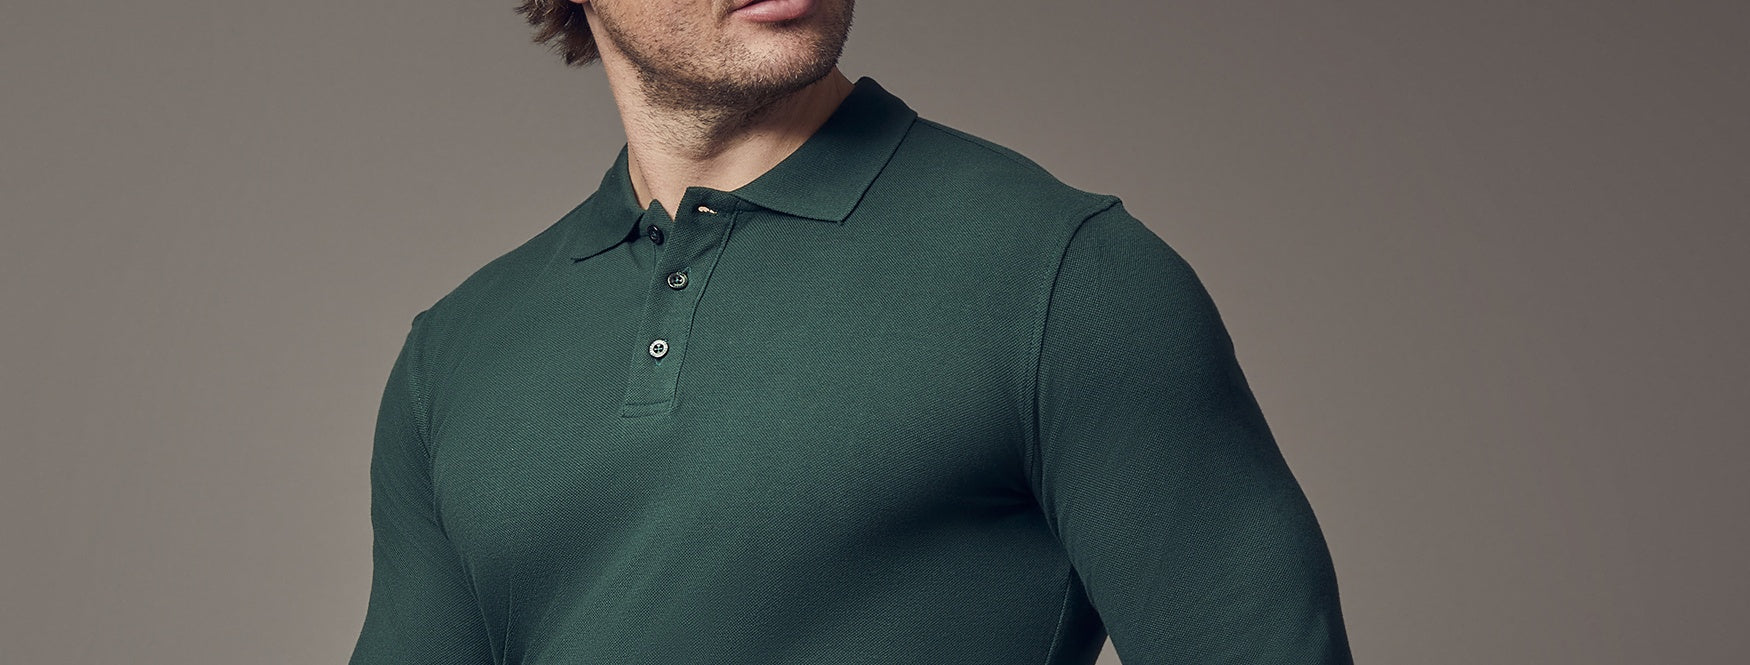 Classic Fit vs Regular Fit Polo Shirts